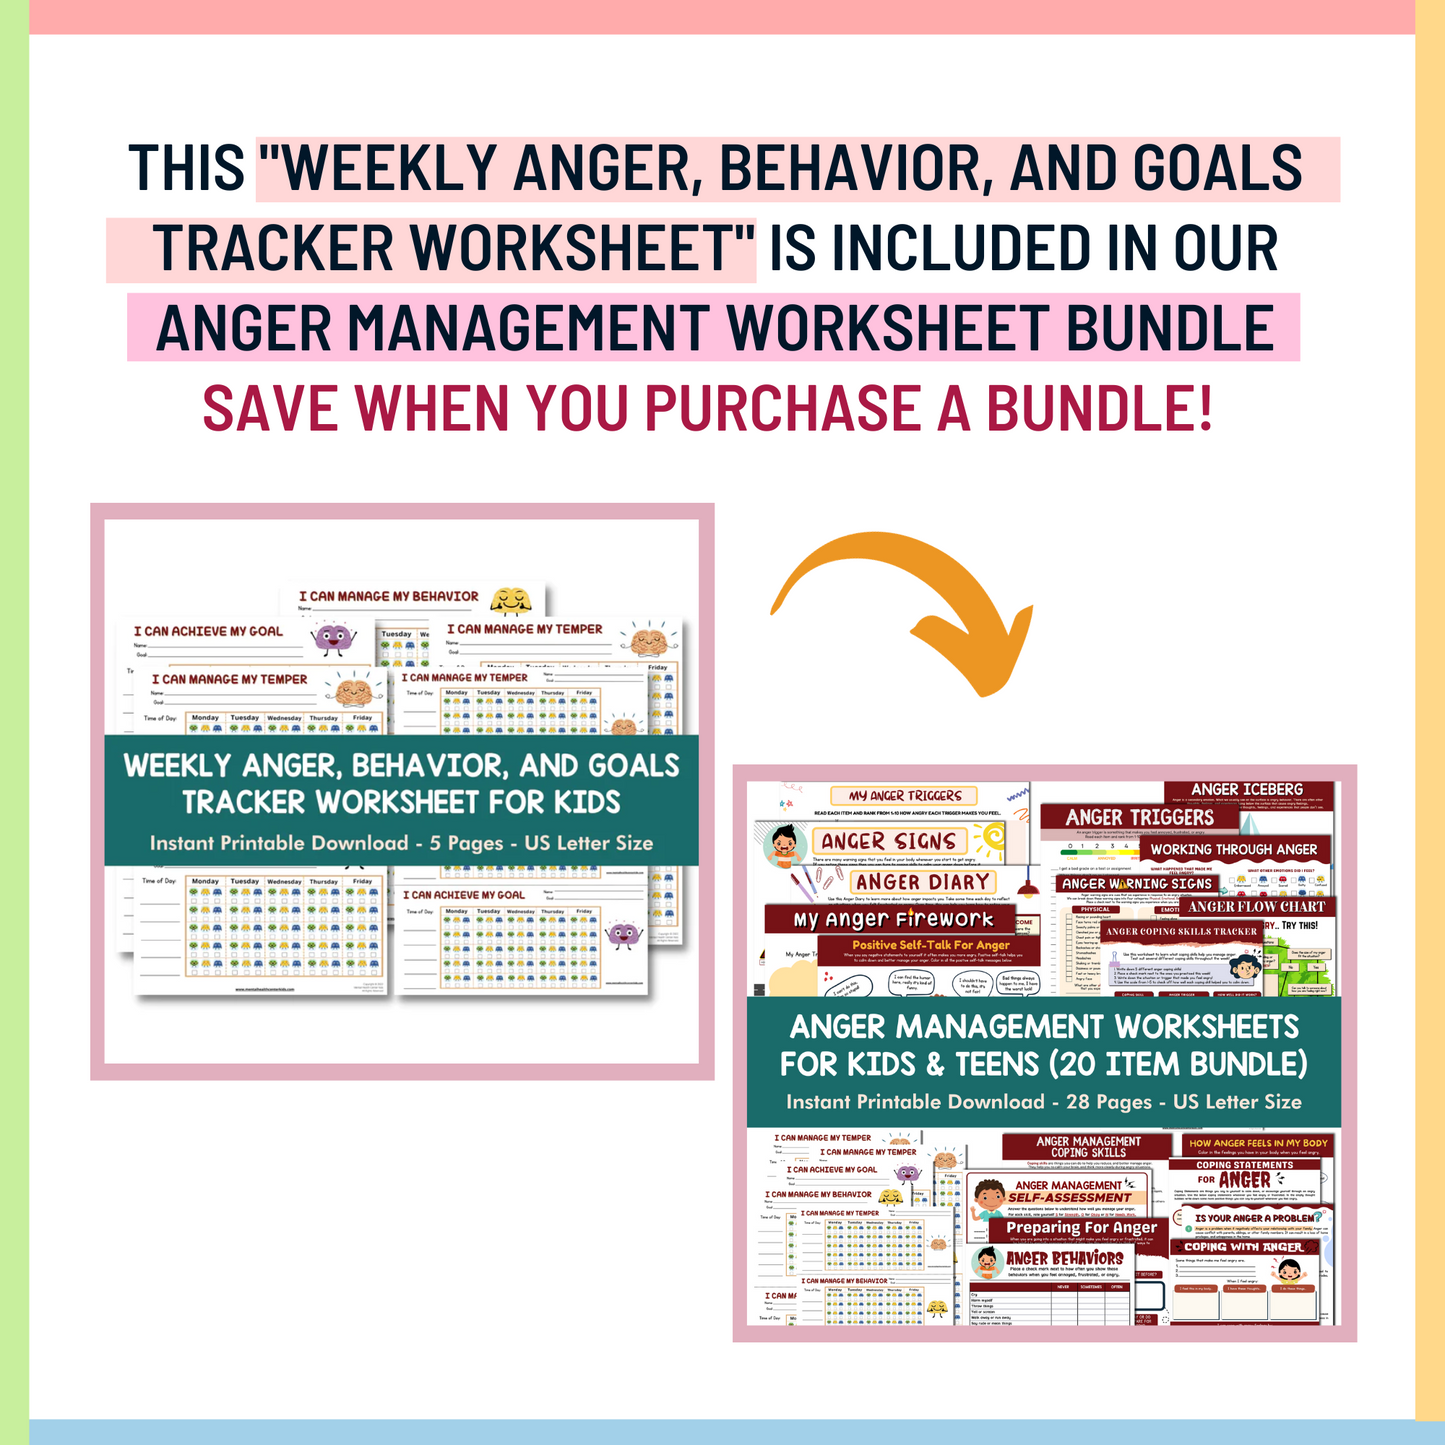 Weekly Anger, Behavior, and Goals Tracker